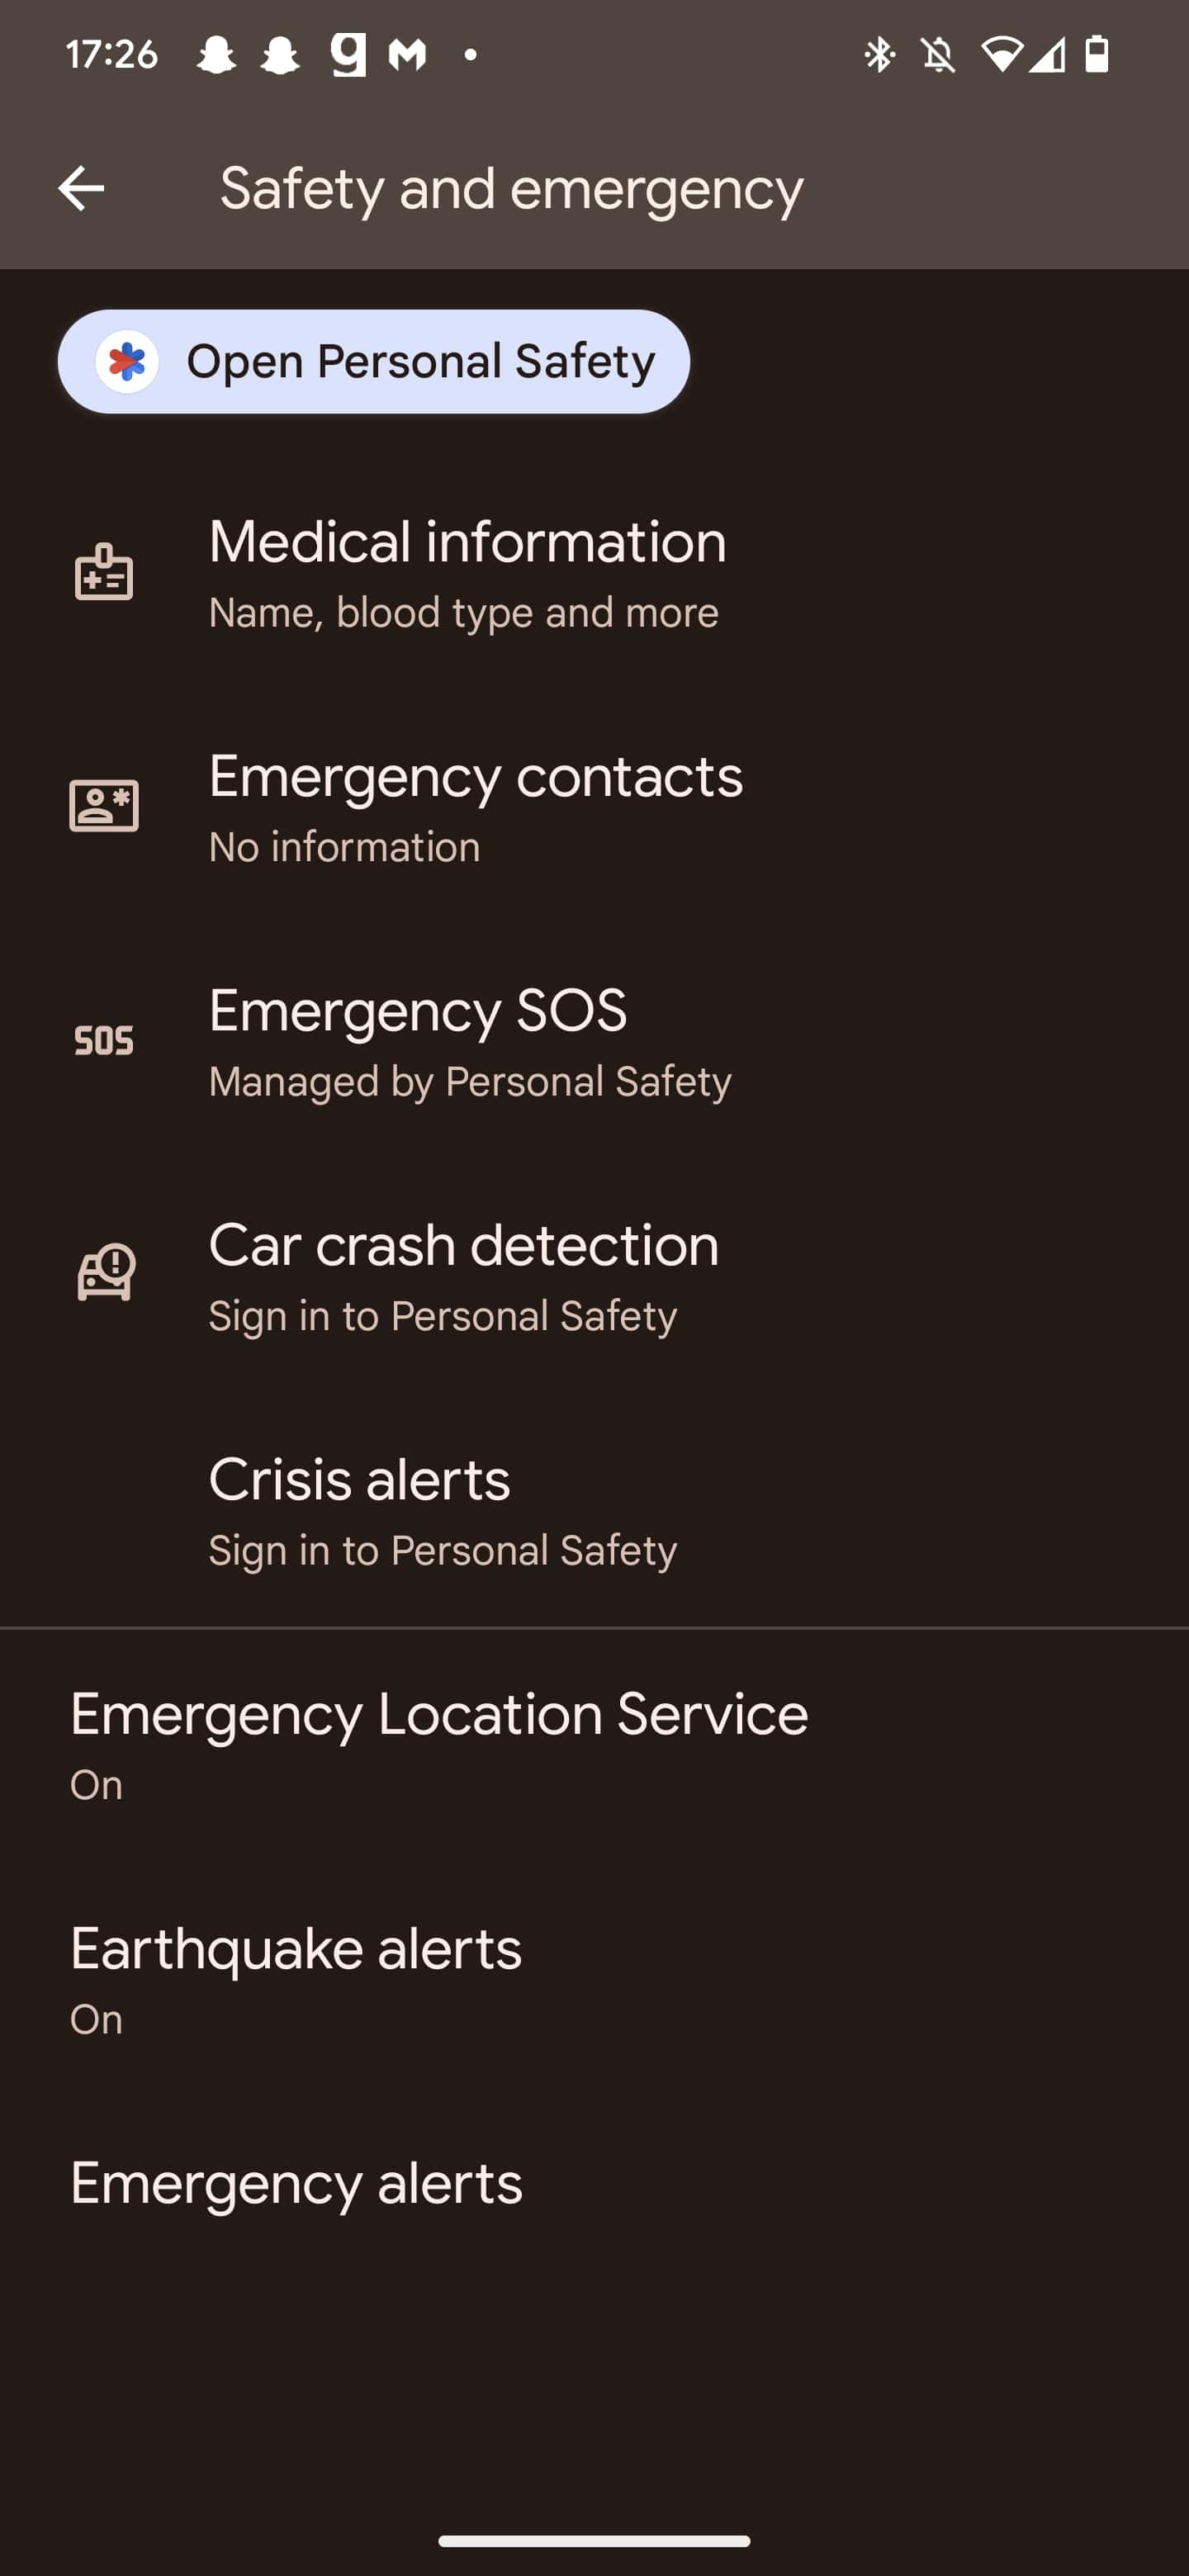 The AMBER Alerts screen on Android 13.